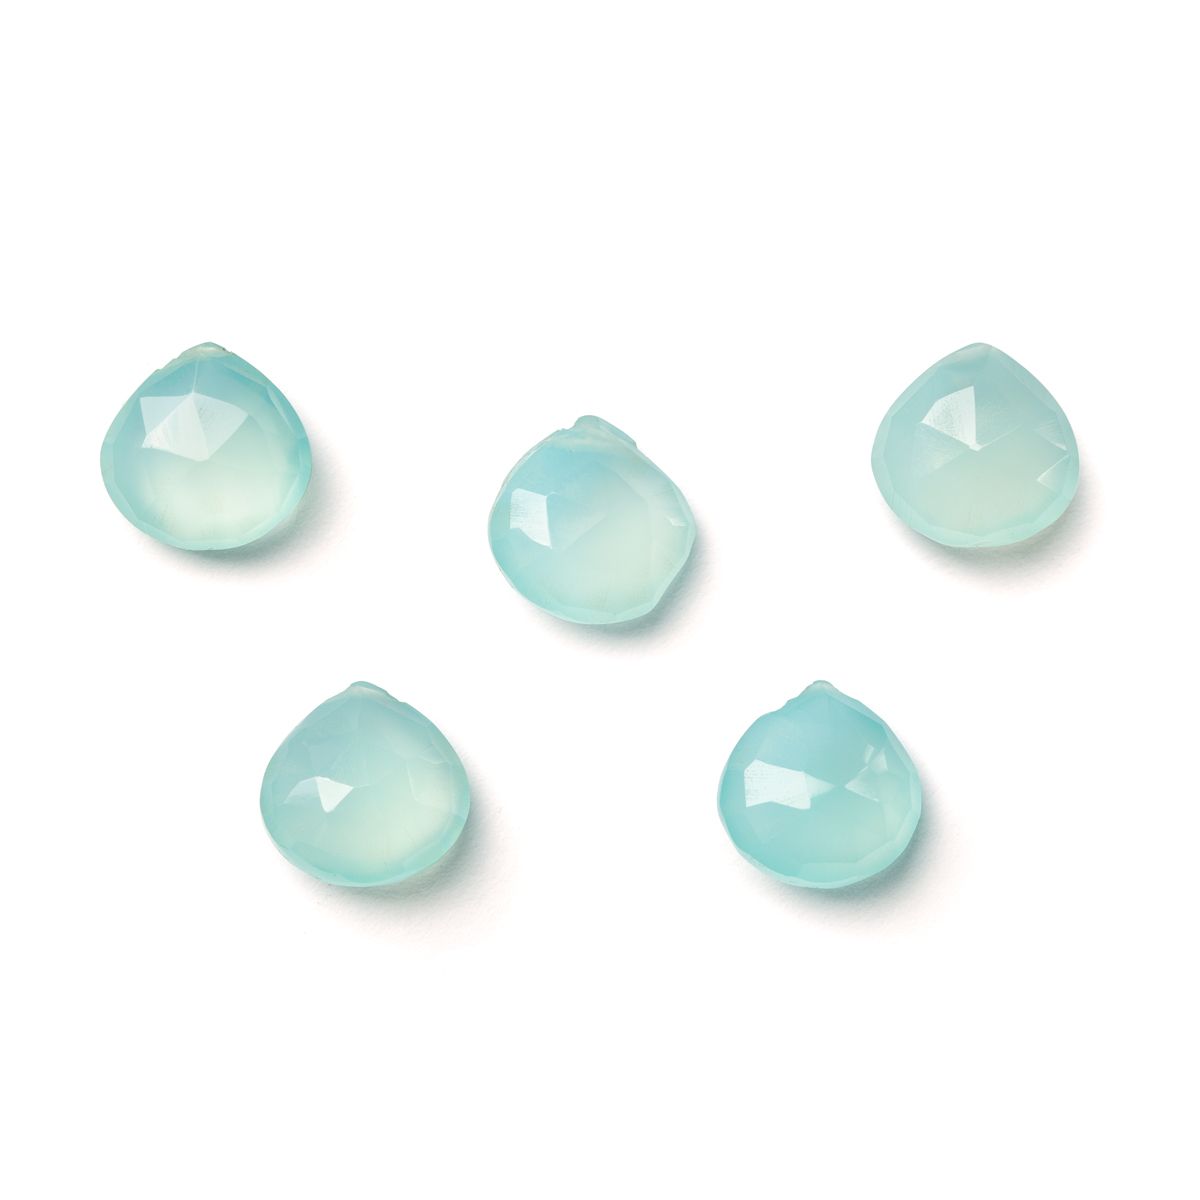 Aqua Blue Chalcedony Faceted Heart Briolette Beads - Approx 10mm